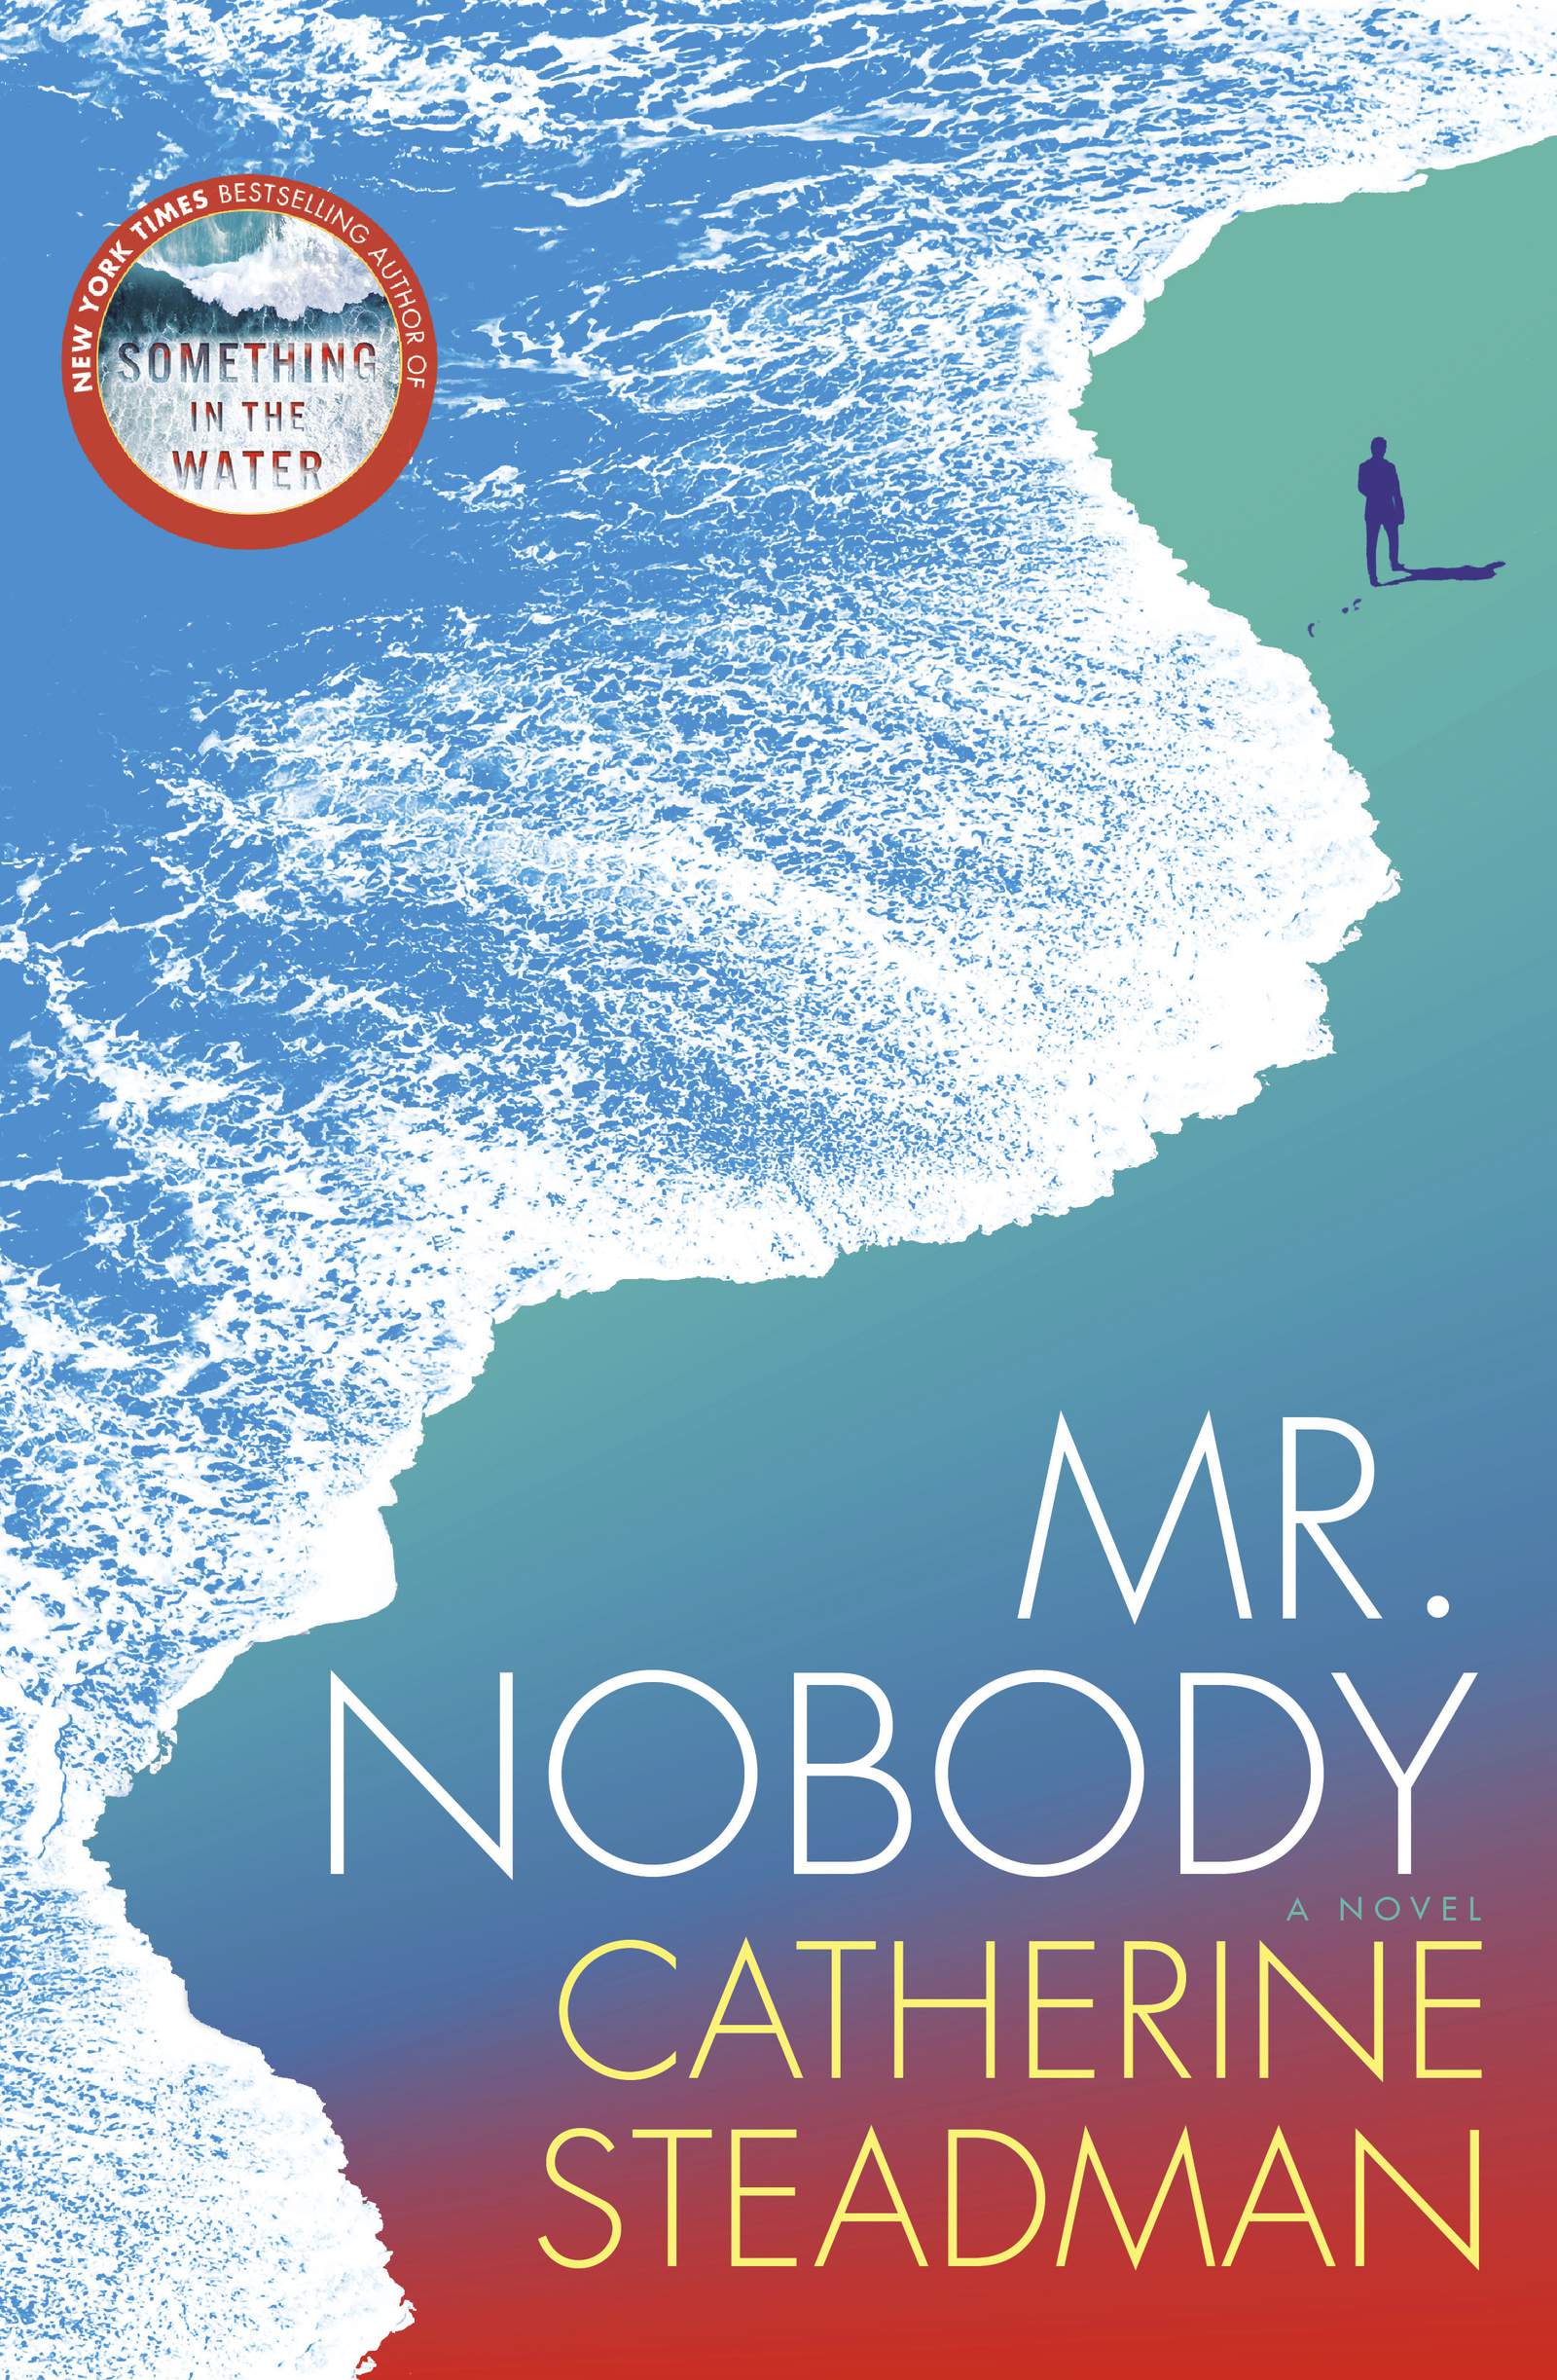 Review: `Mr. Nobody' is mesmerizing psychological thriller